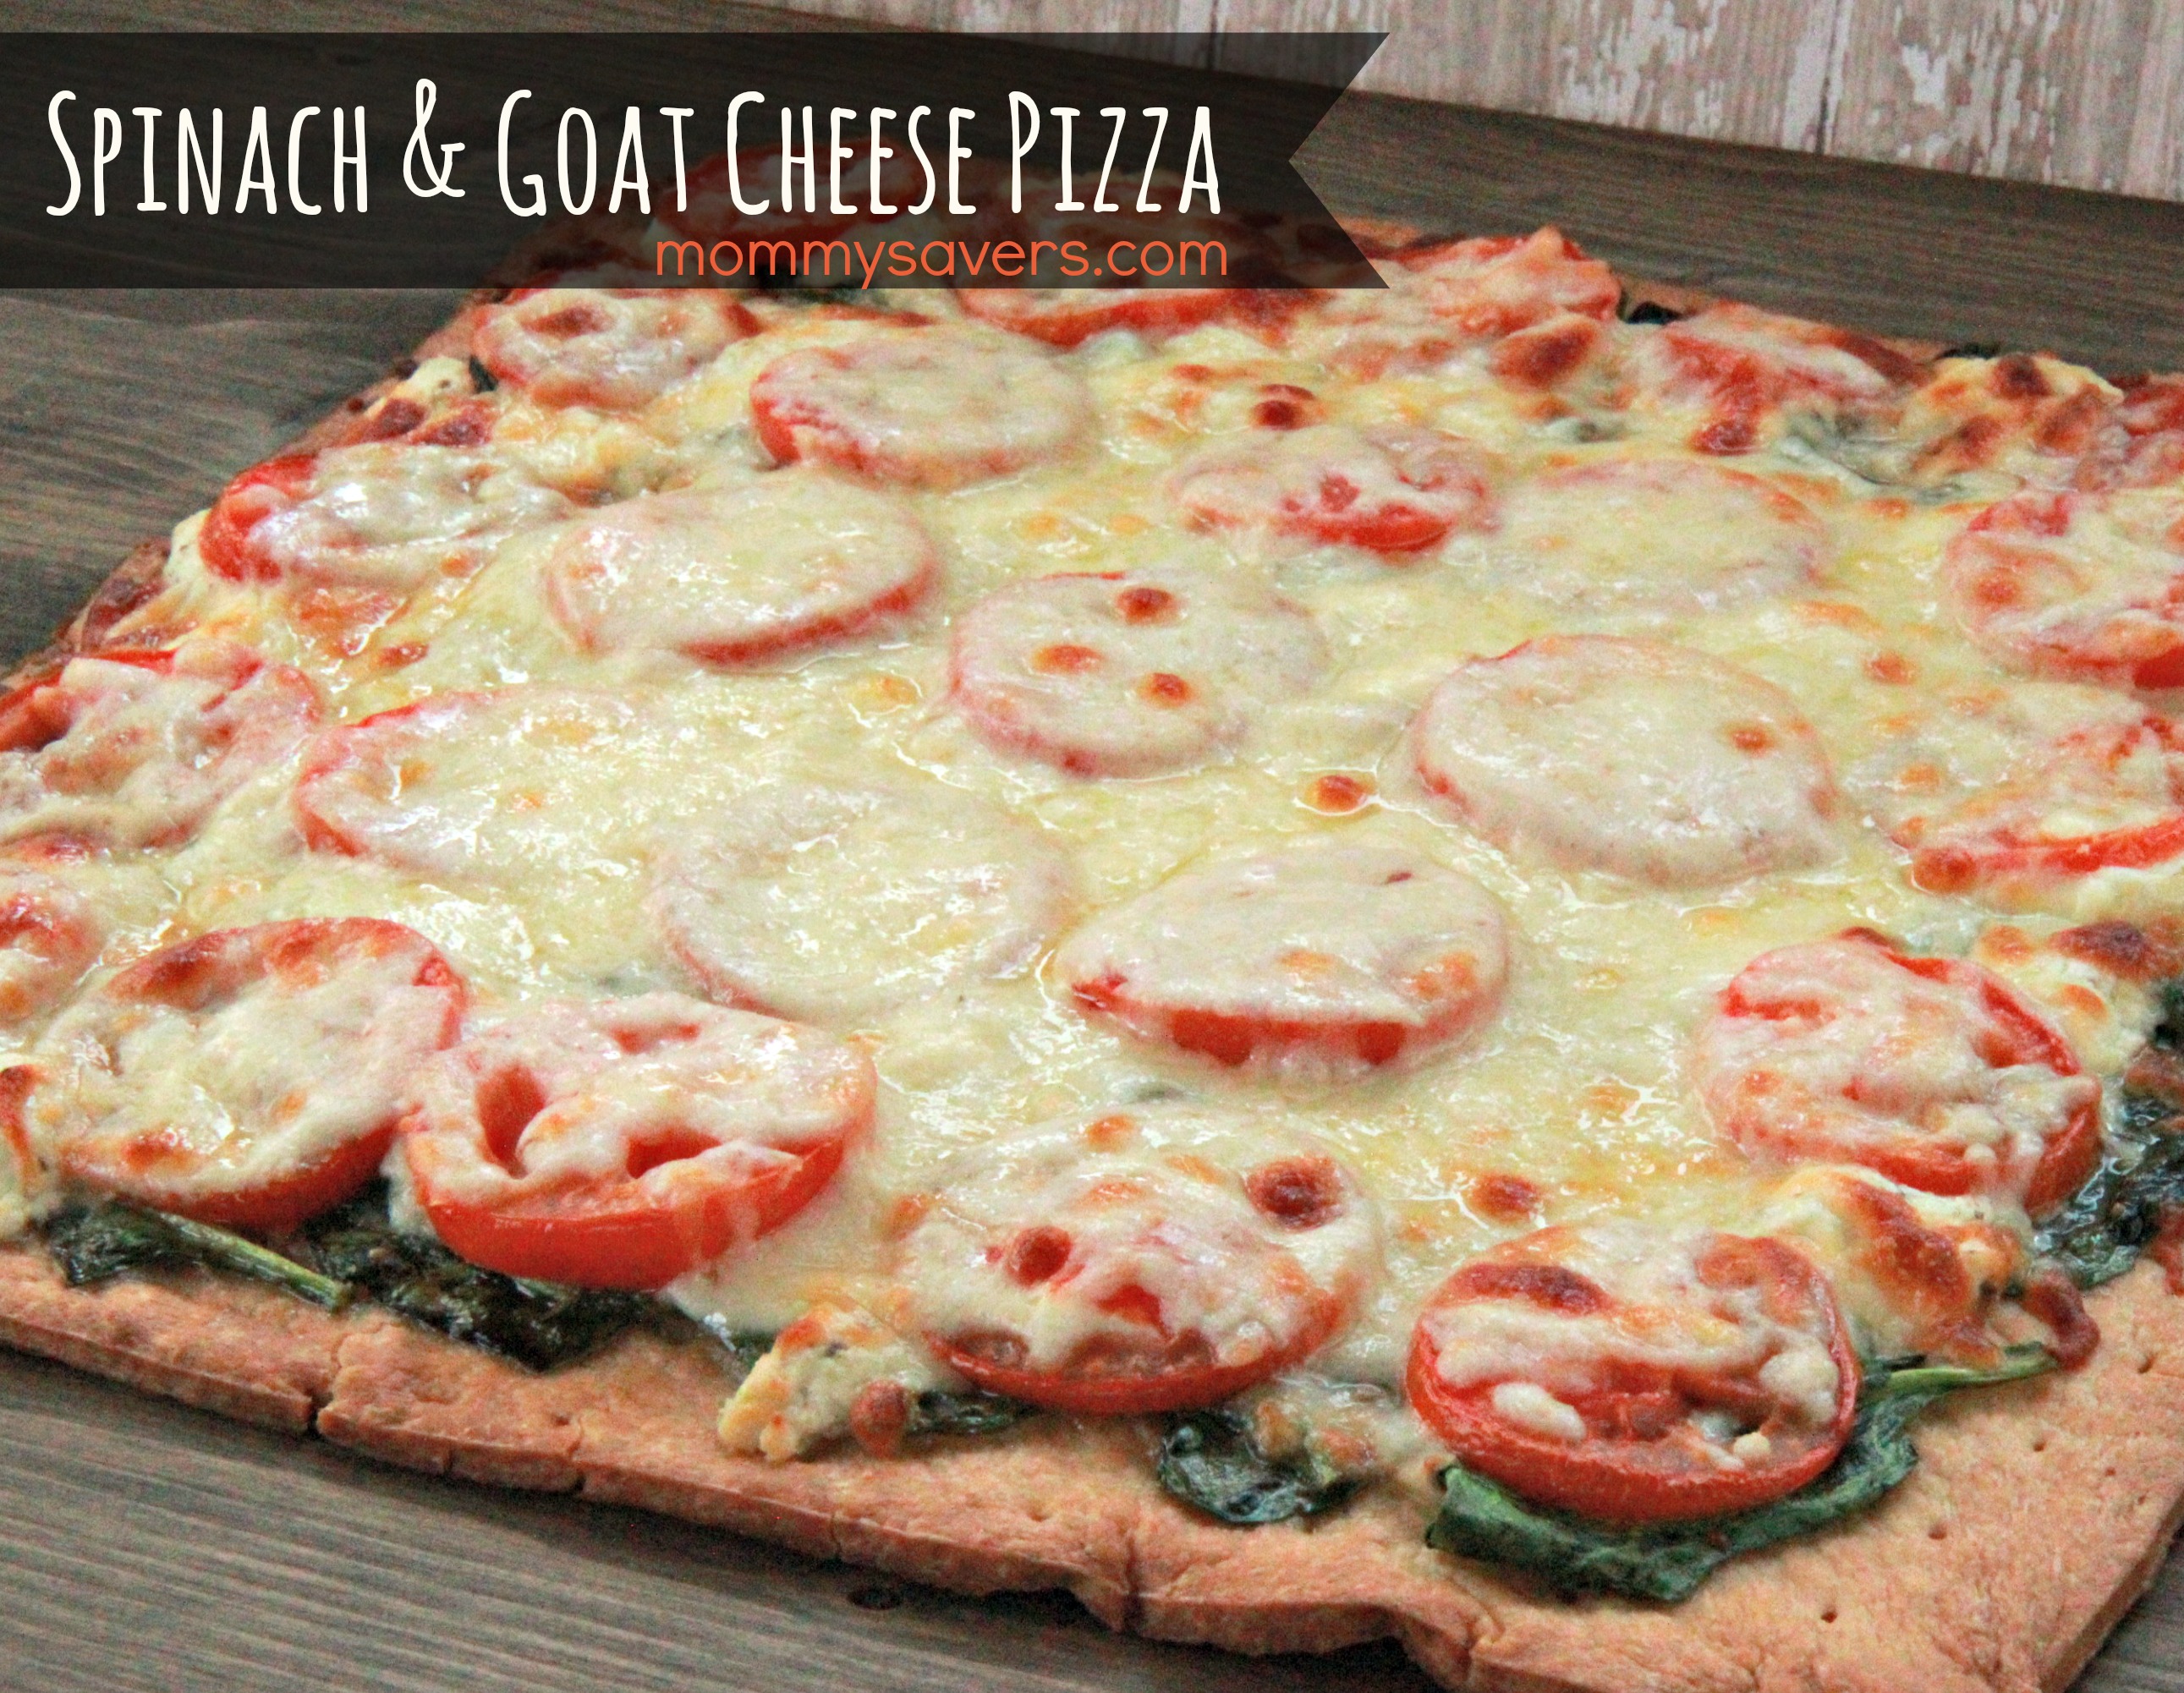 Spinach and Goat Cheese Pizza Recipe